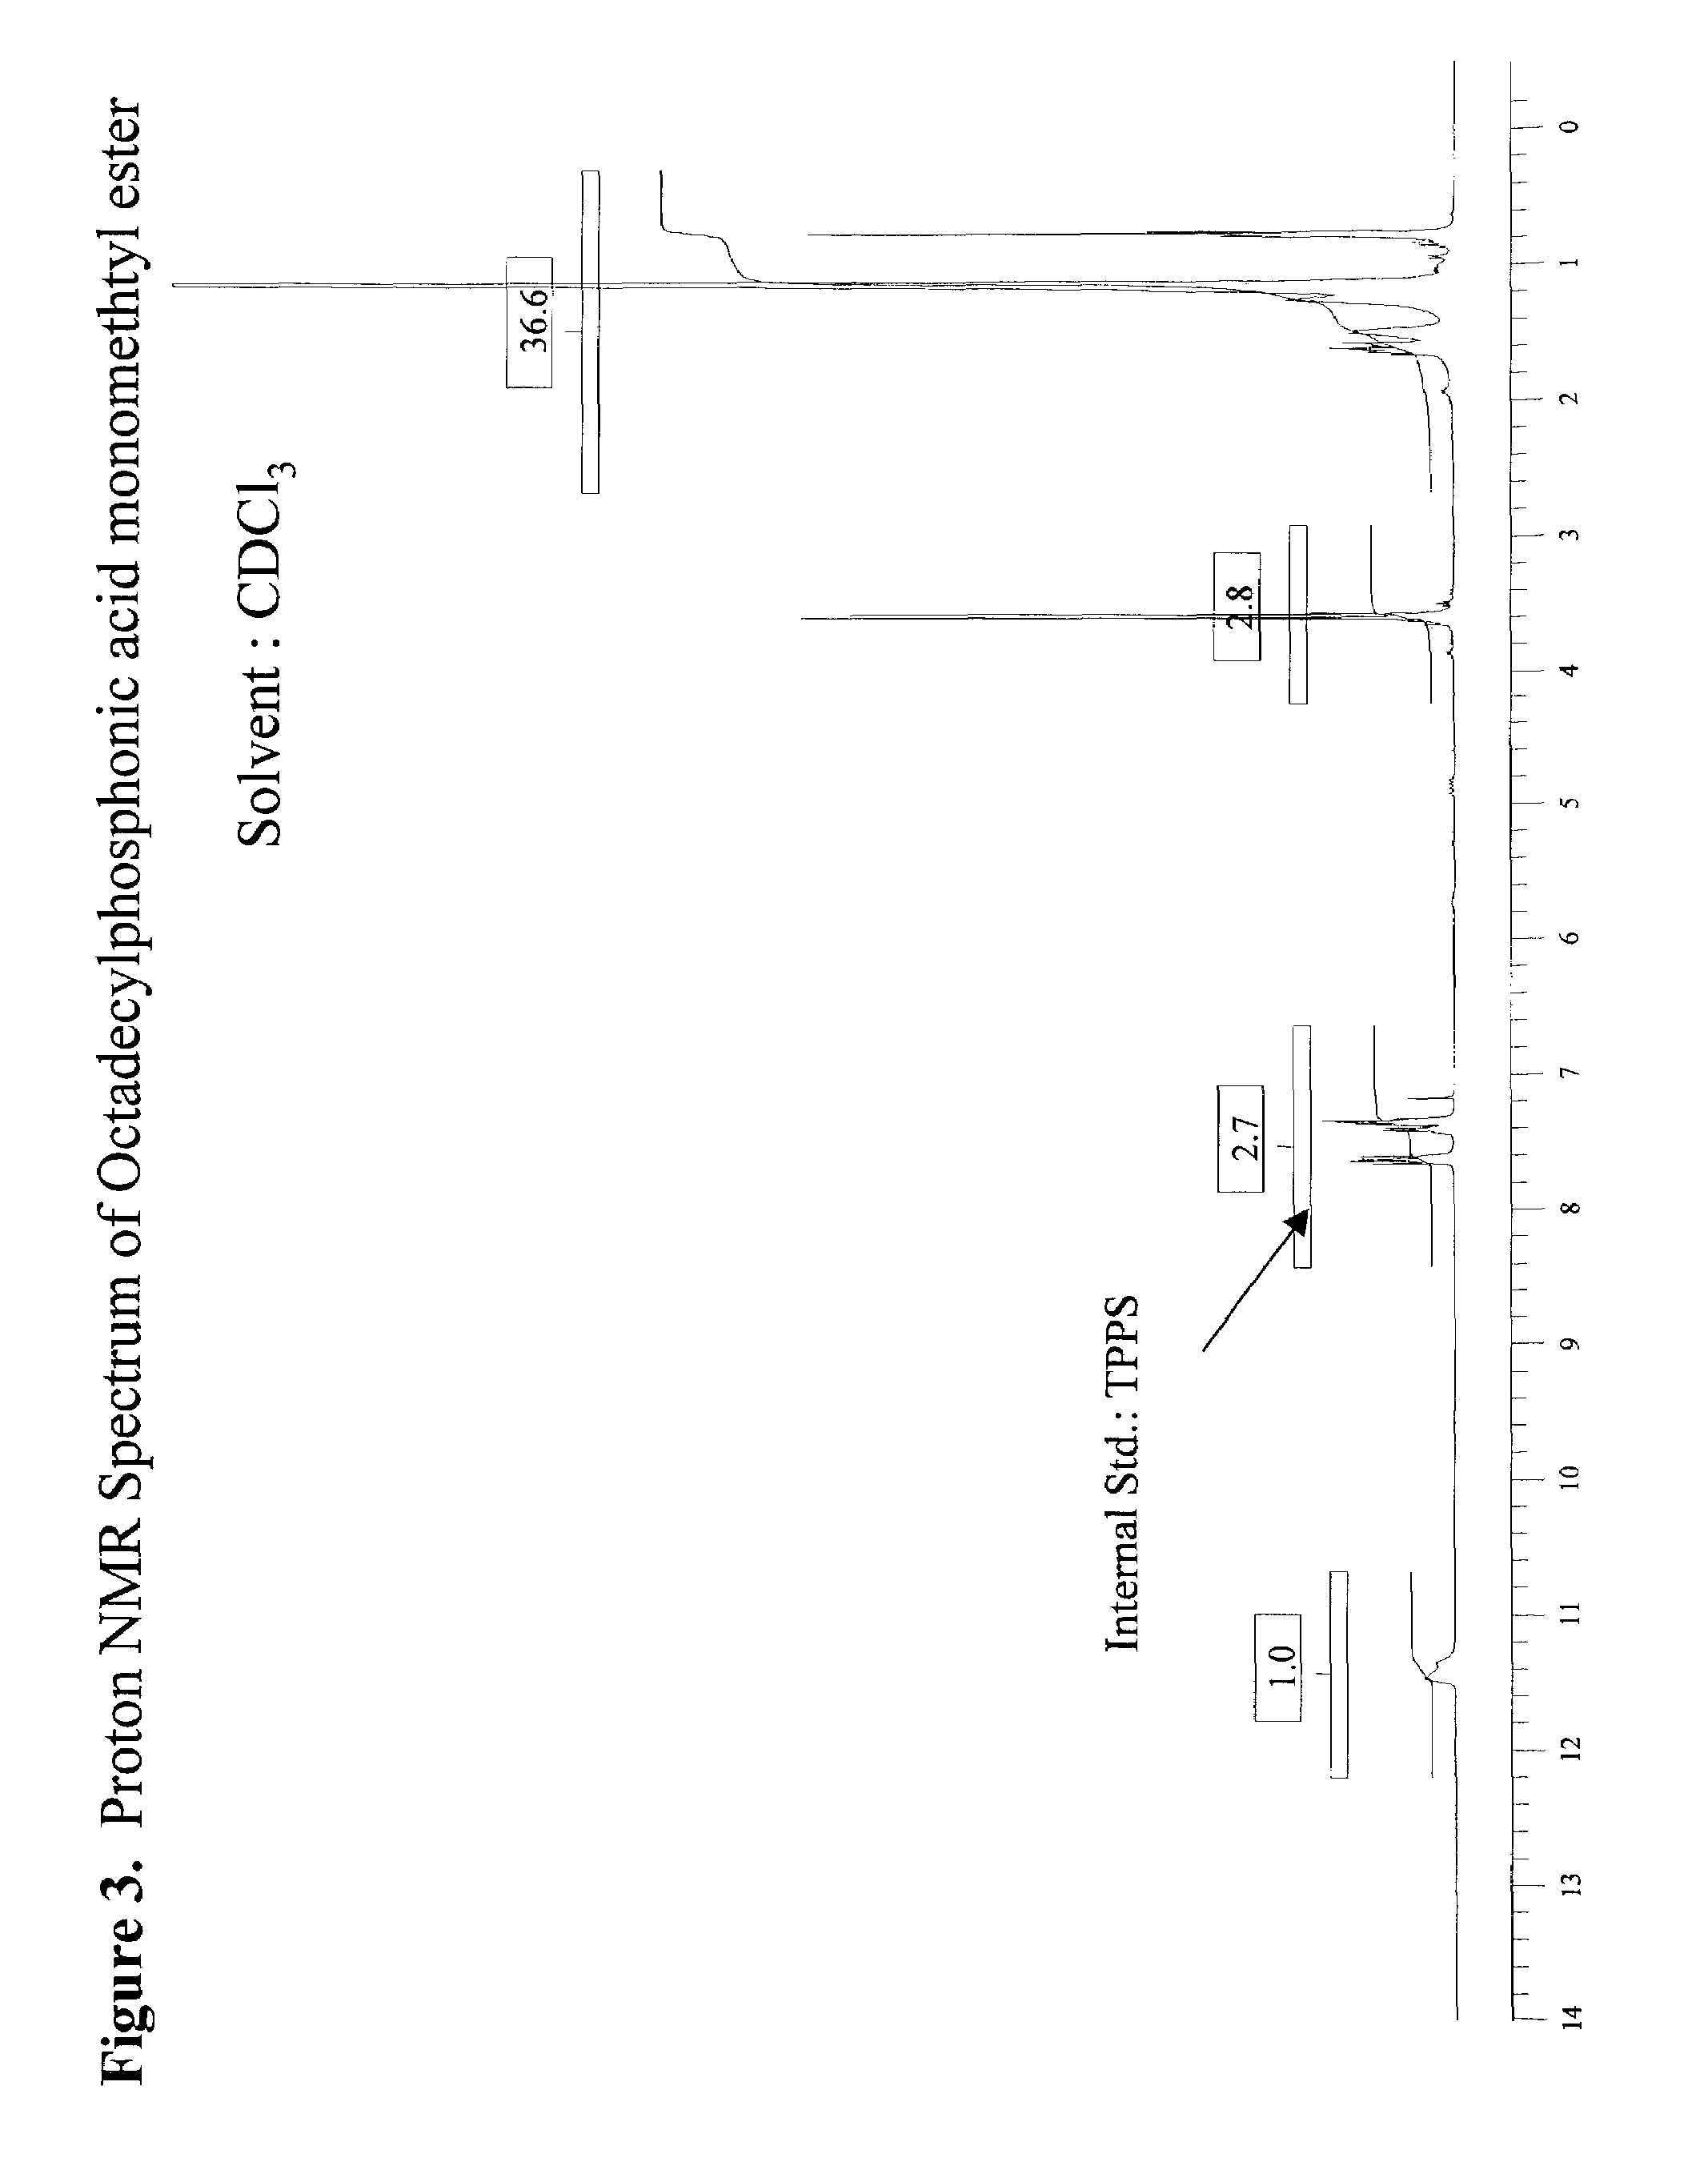 Process for manufacturing alkylphosphonate monoesters